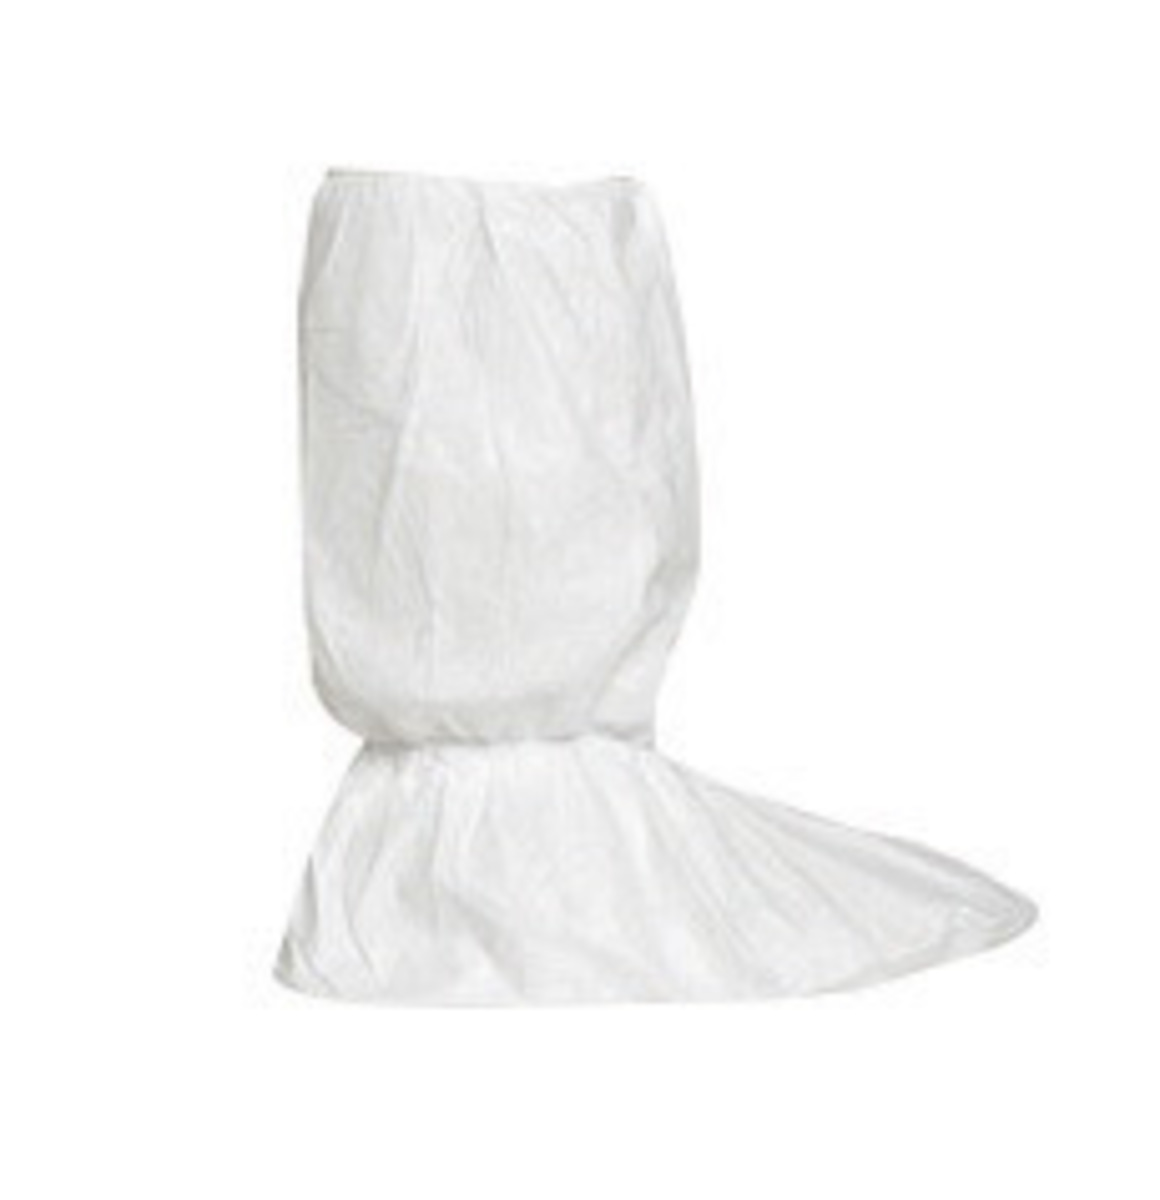 DuPont™ X-Large White IsoClean® Tyvek® Disposable Shoe Cover (Availability restrictions apply.)